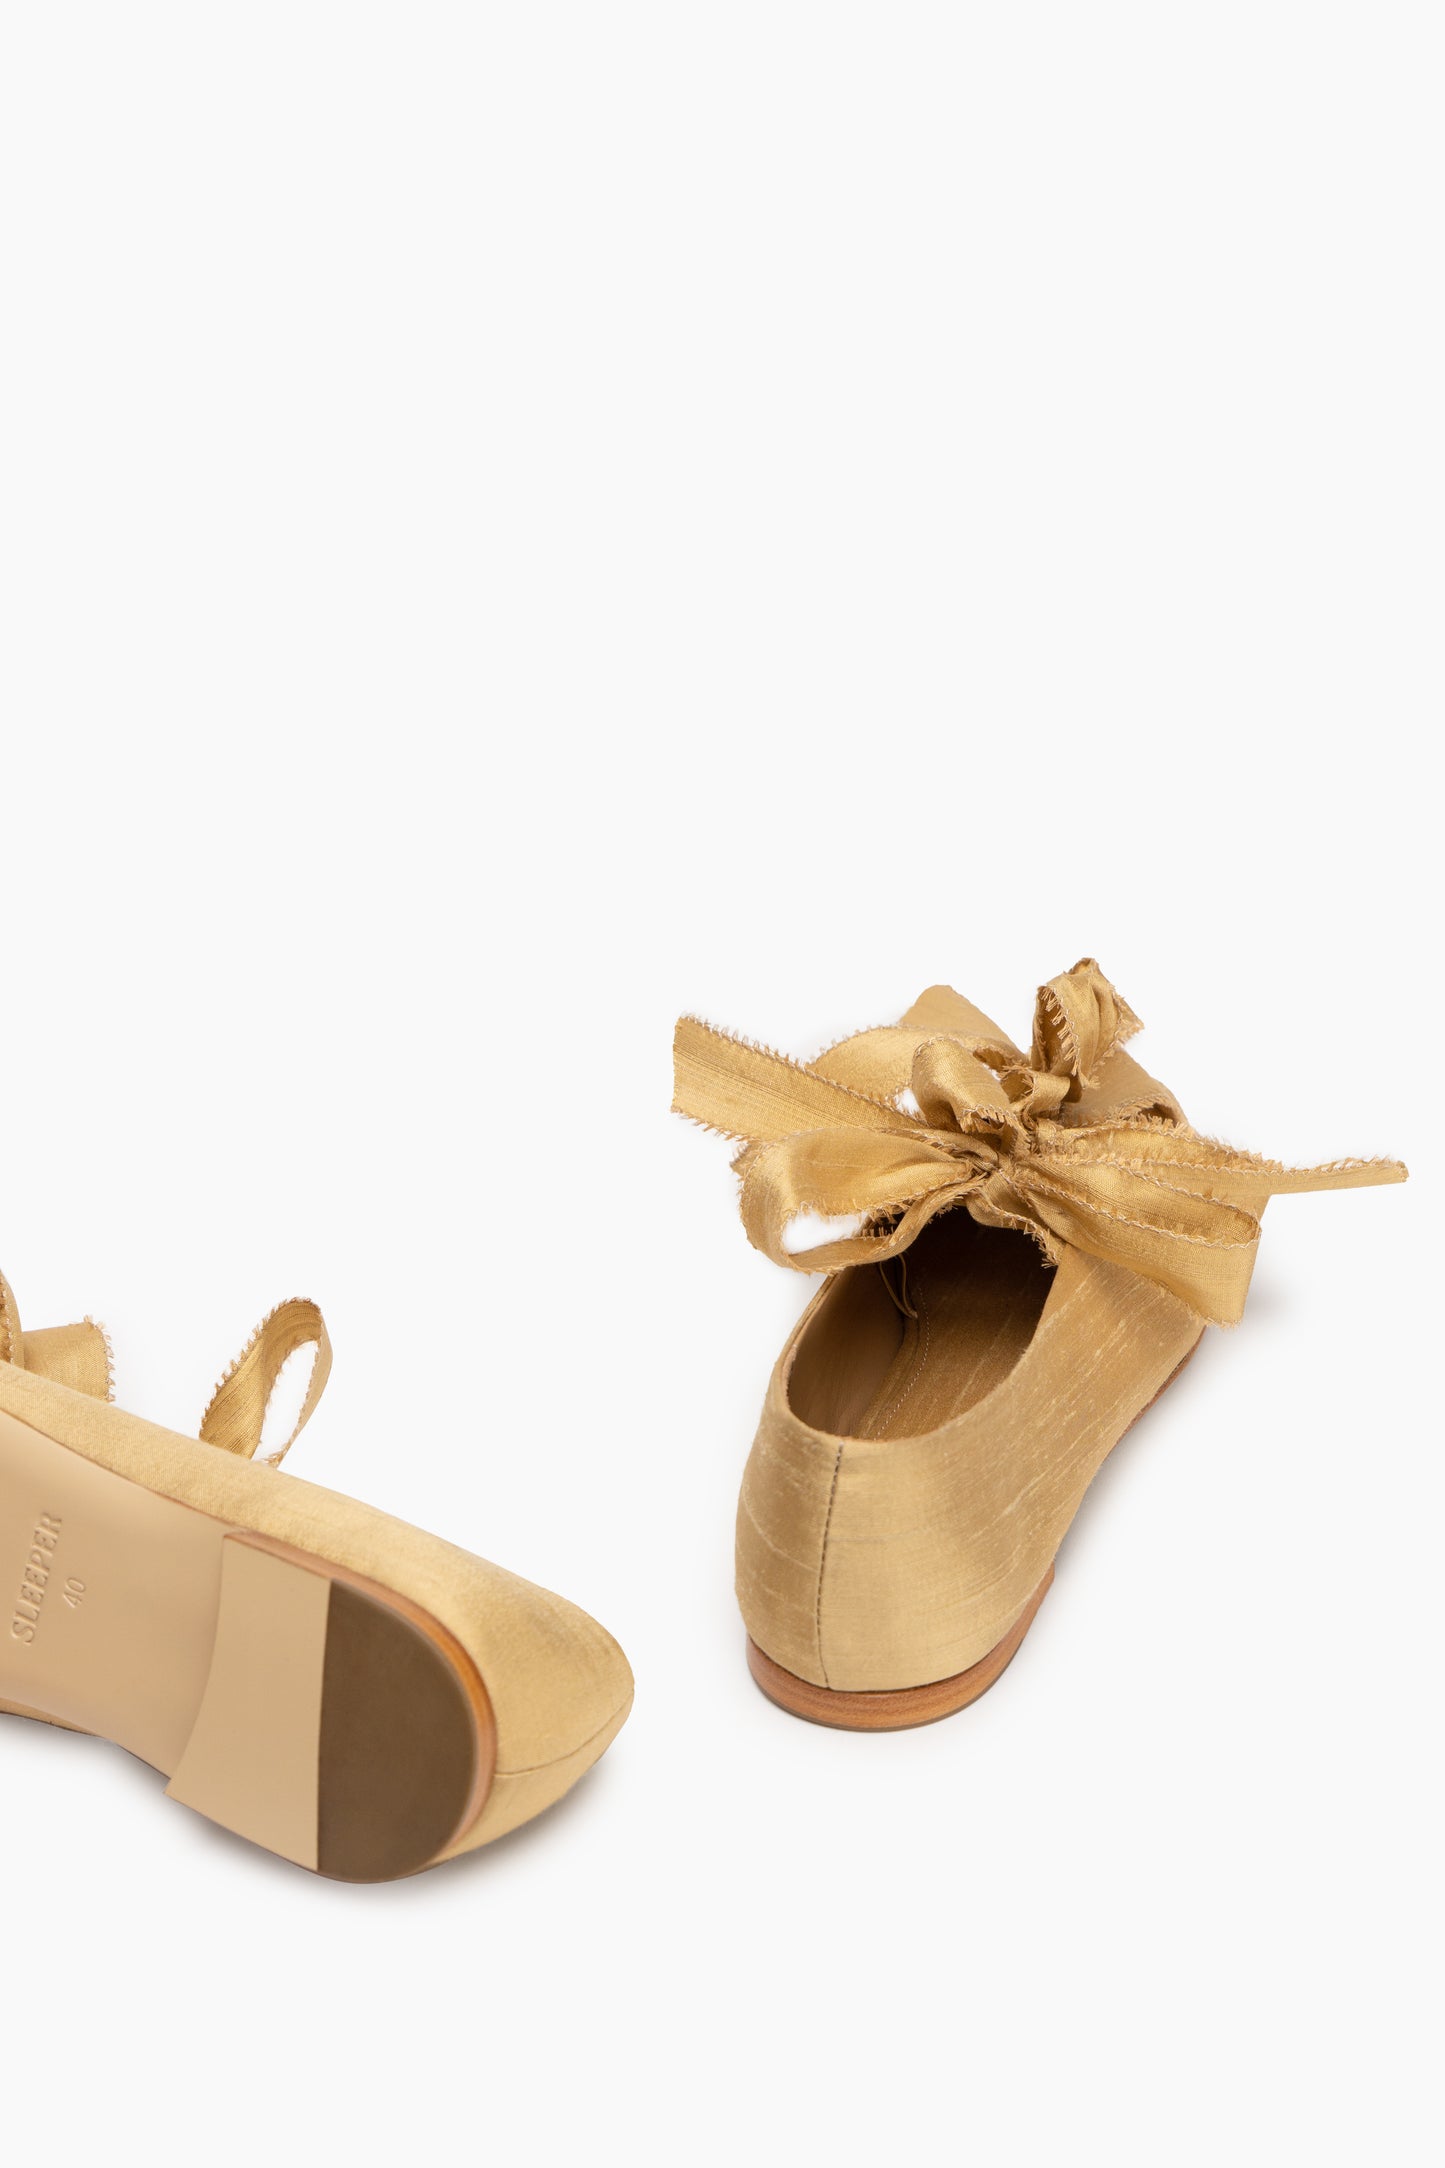 Mille-feuille Silk Flats with Bows in Gold